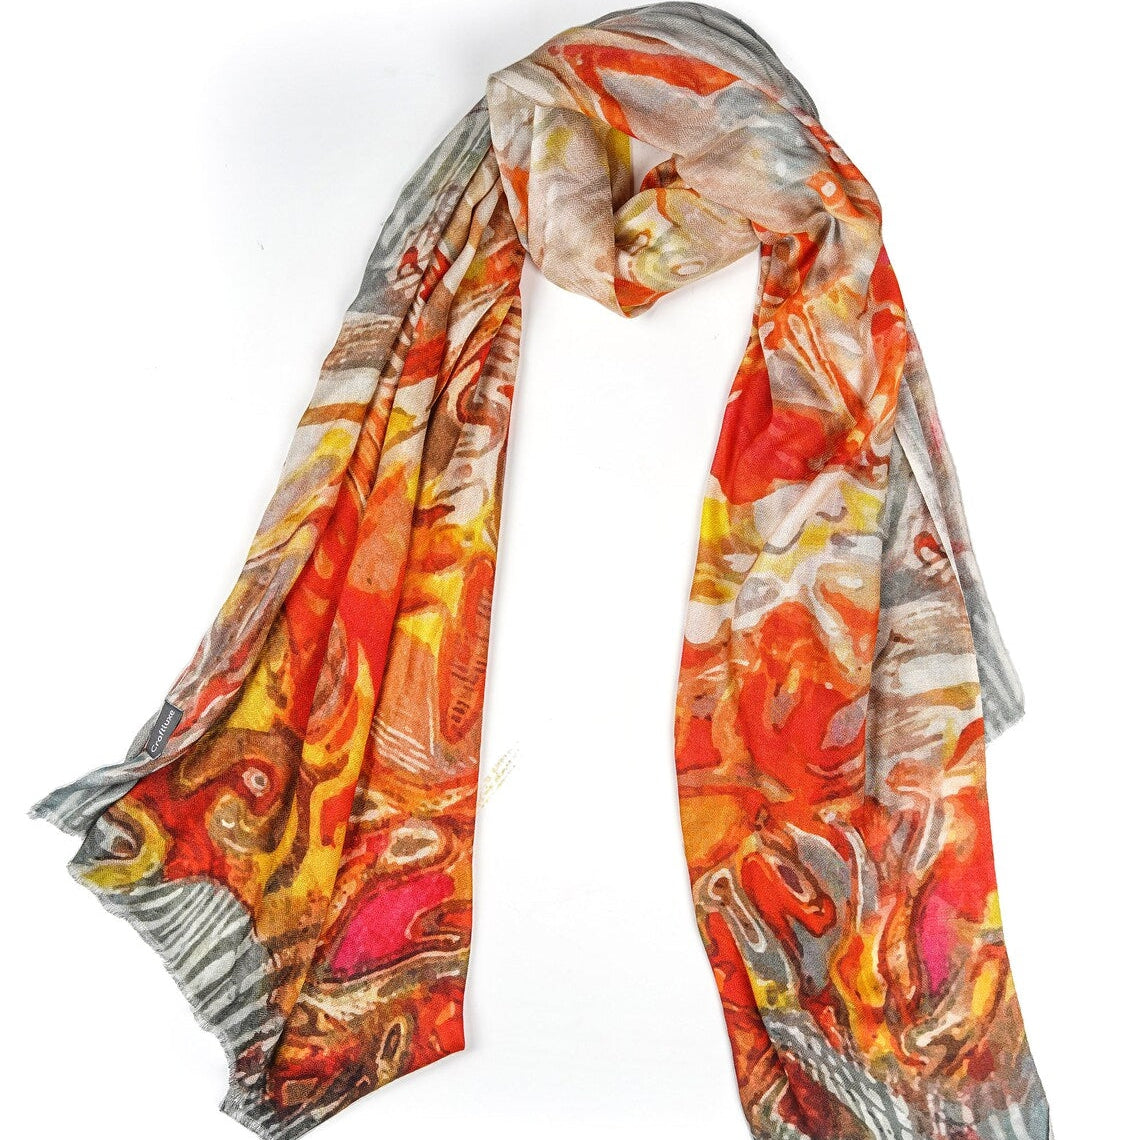 Silk Modal Scarf, long all season scarf in luxurious fabric blend, shawl and wrap, accessories for women, gifts for her, summer scarf, shawl - Cream/Orange